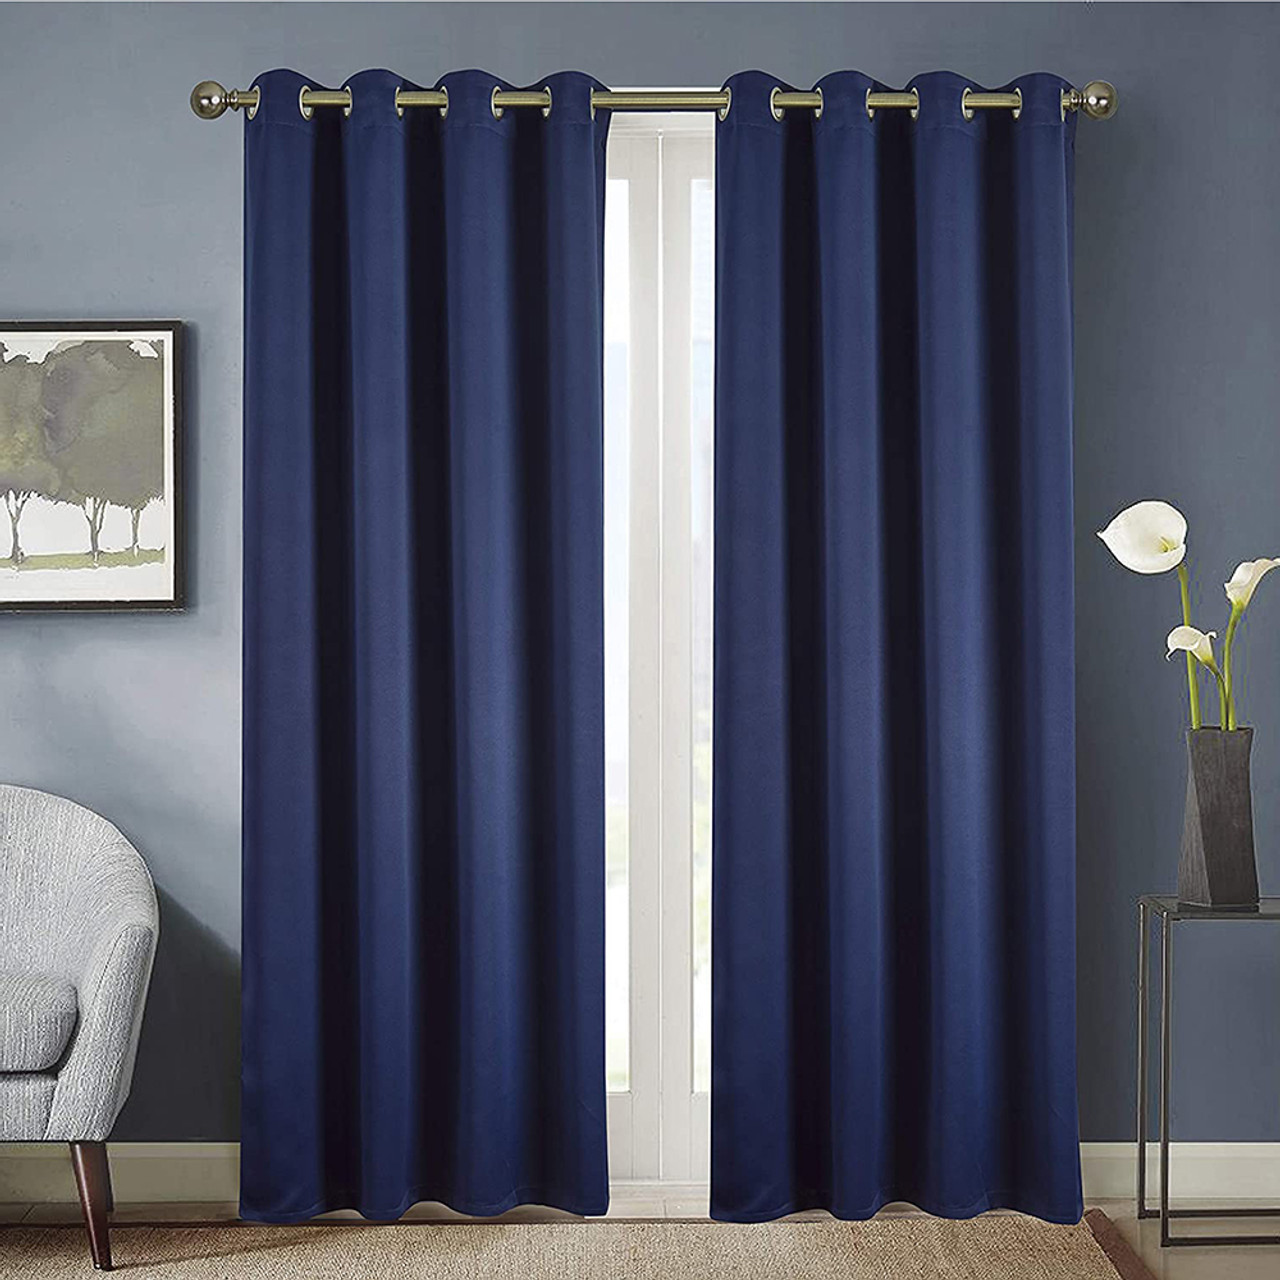 84" Anchorage Thermal Insulated Blackout Grommet Curtain Panel (Set of 2) product image